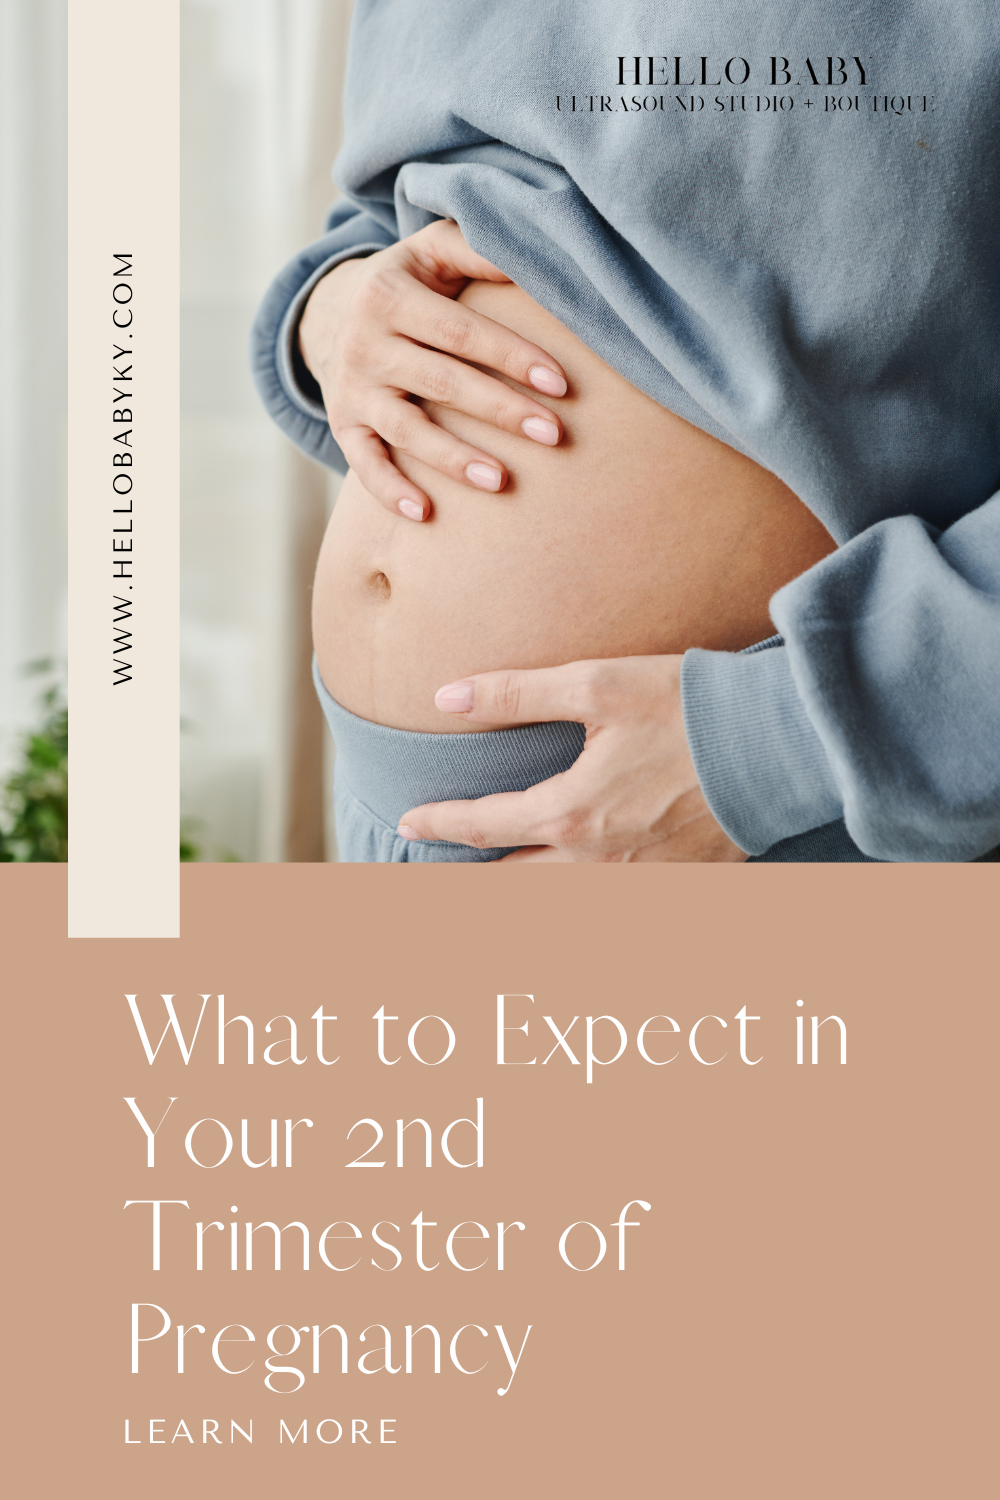 What to Expect During Your Second Trimester of Pregnancy • The